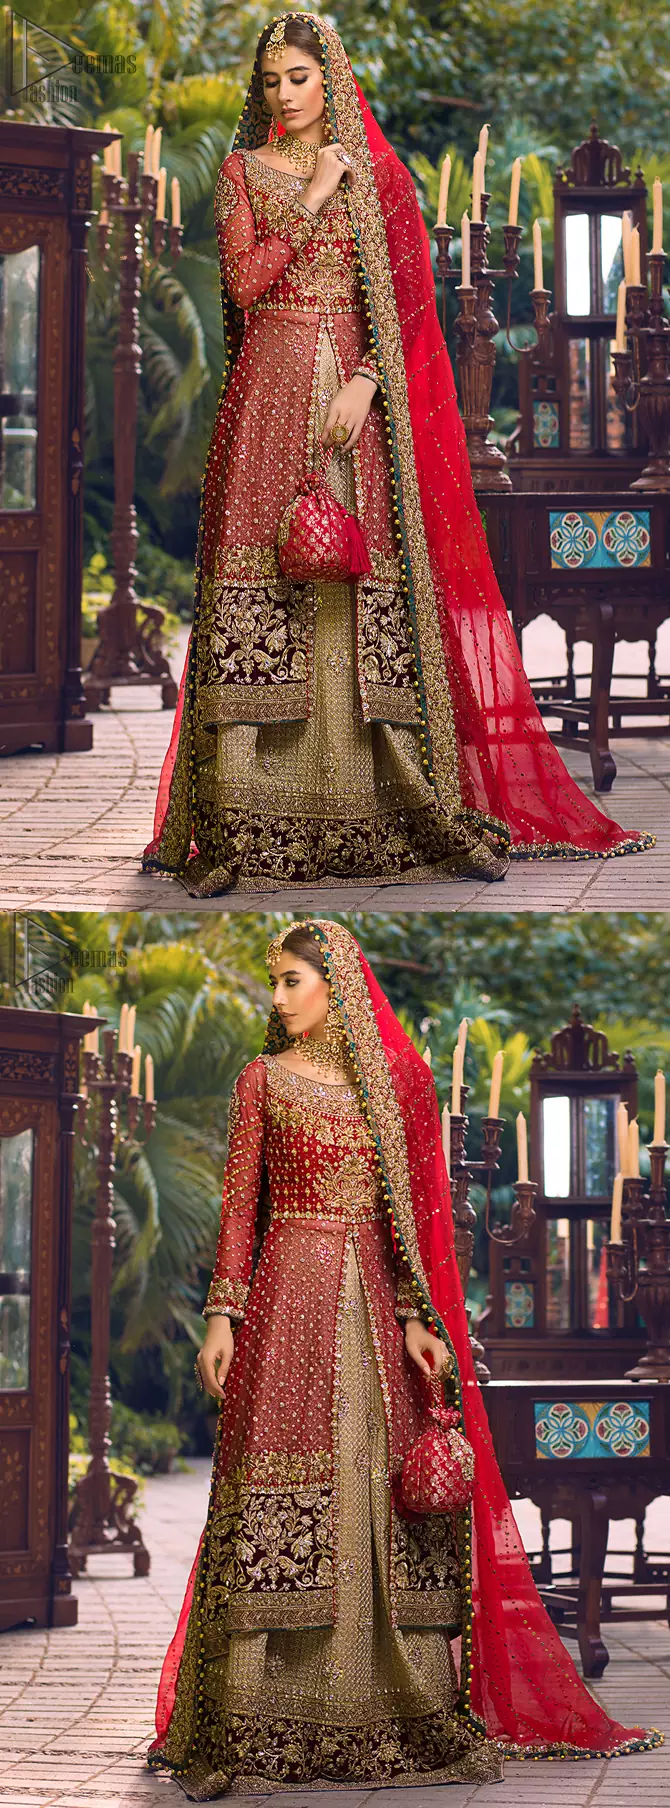 Tradition meets modernity in this dress. The lehenga with hand embroidery all over and finished with Velvet appliqued borders completes the look.